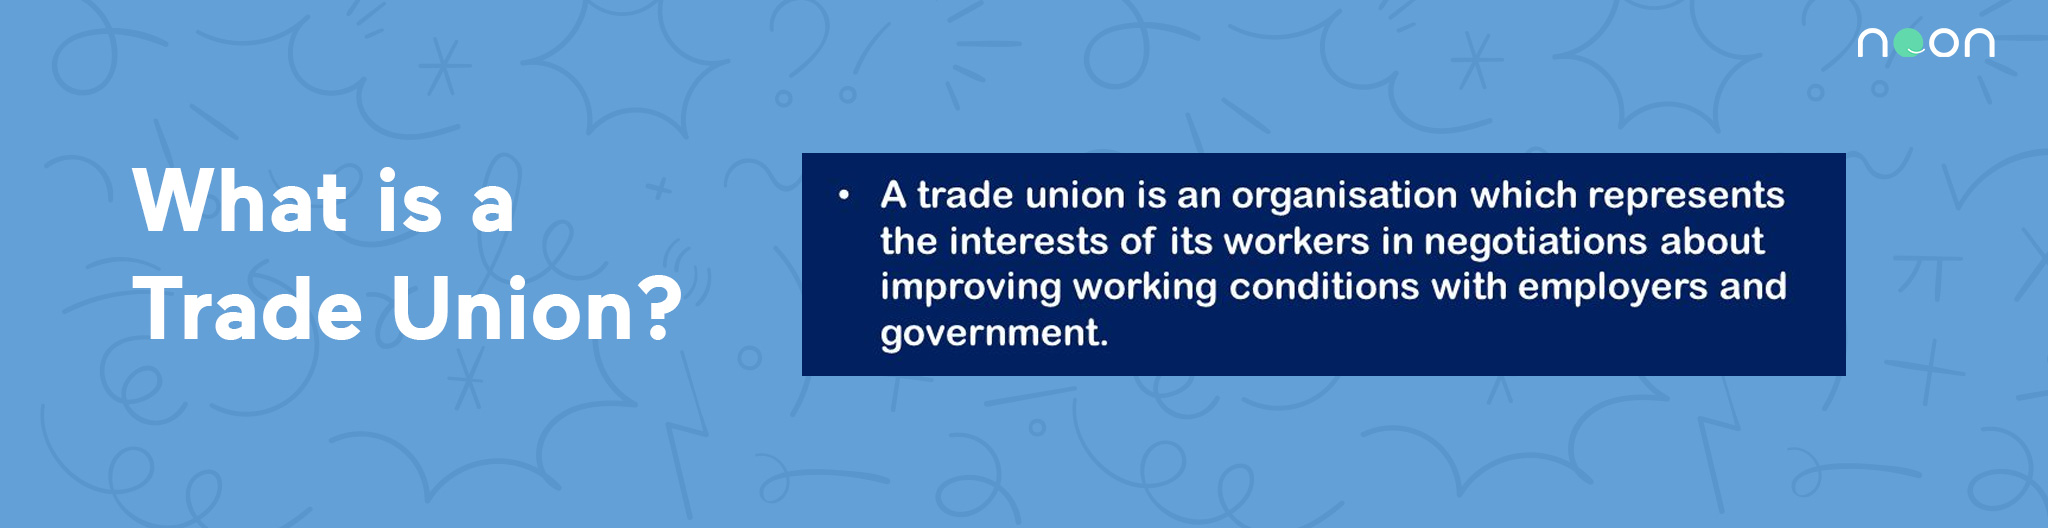 What is a Trade Union